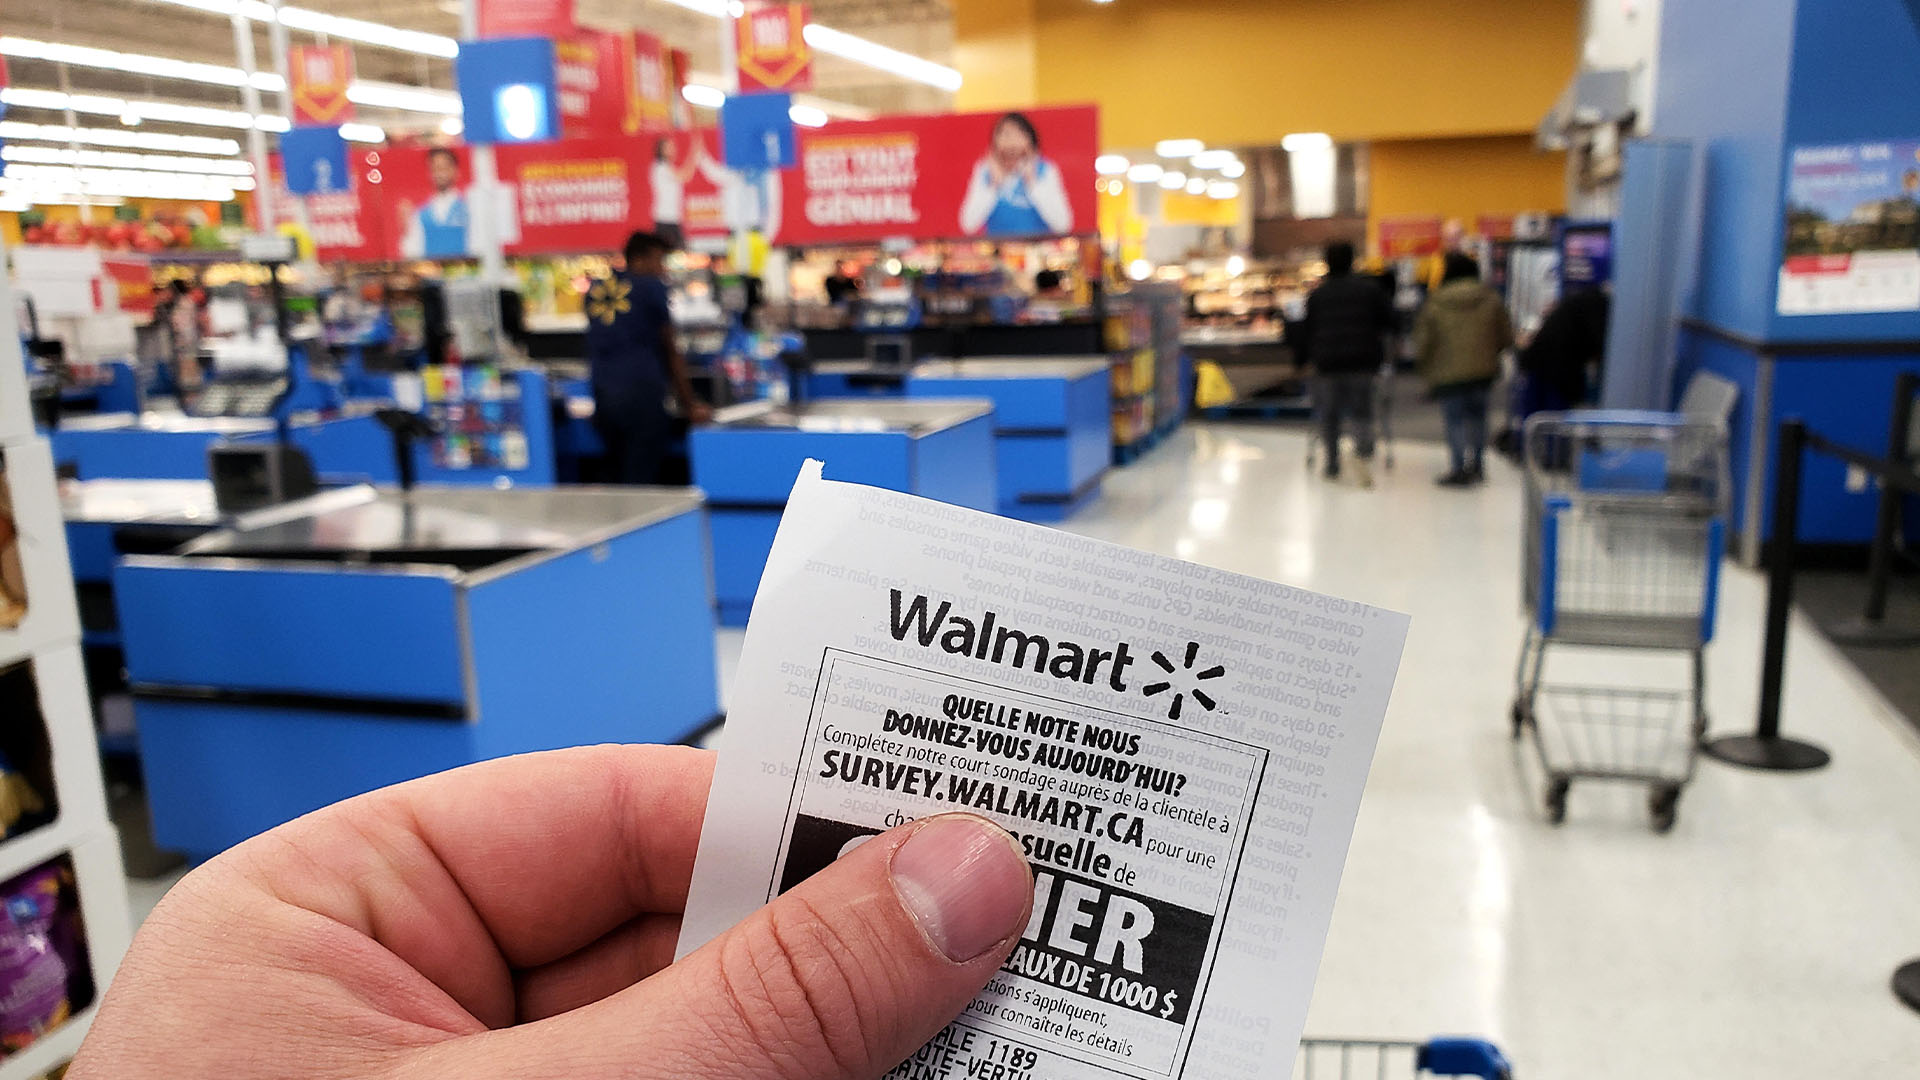 ‘I’m still banned,’ boasts Walmart shopper fed up with receipt checks – he refuses to comply and the law is on his side [Video]